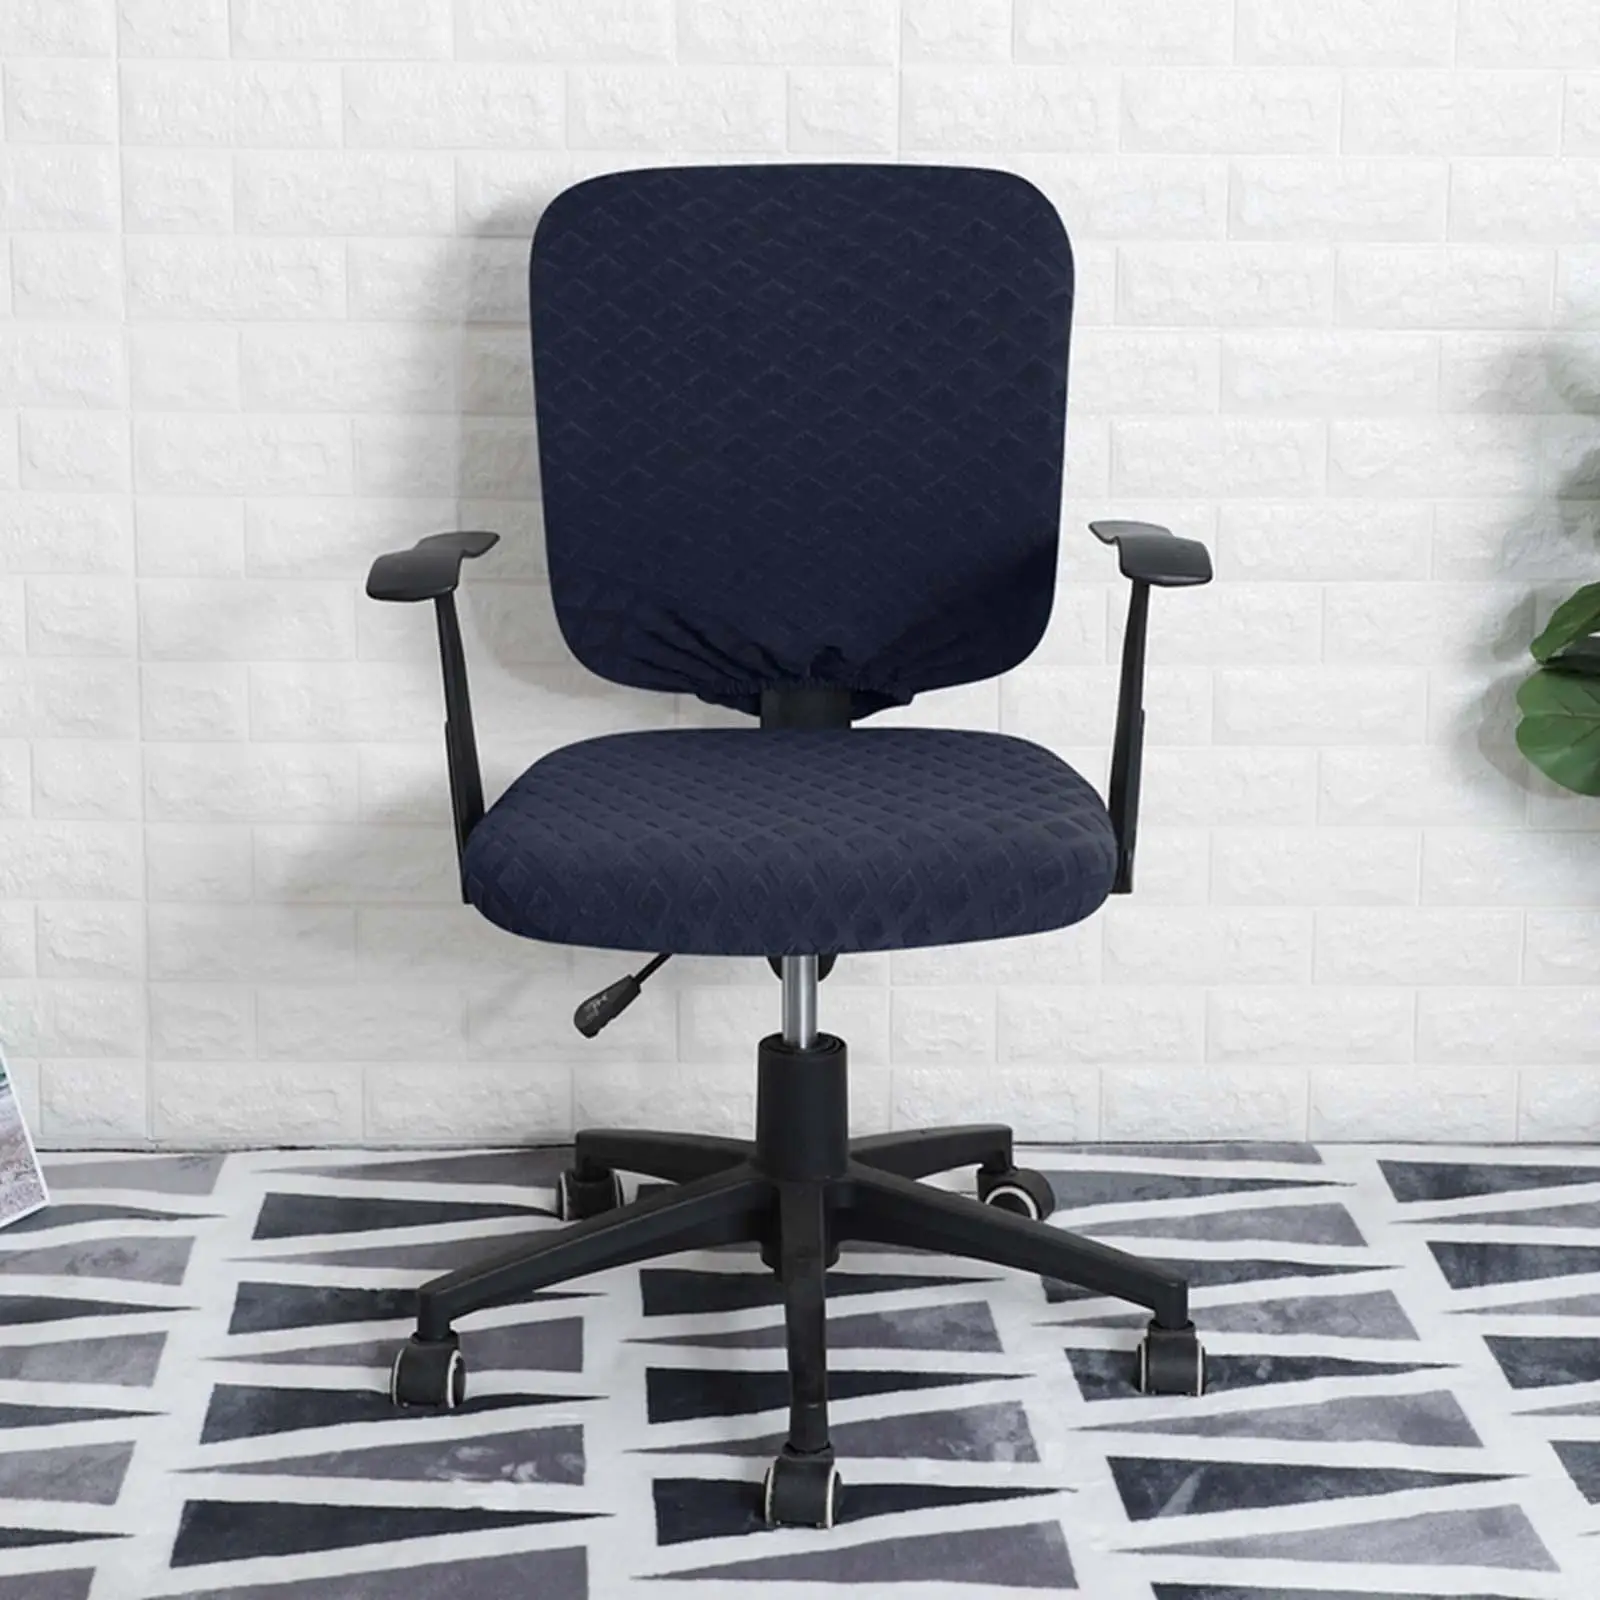 Split Office Chair Cover Waterproof Universal Washable Protective